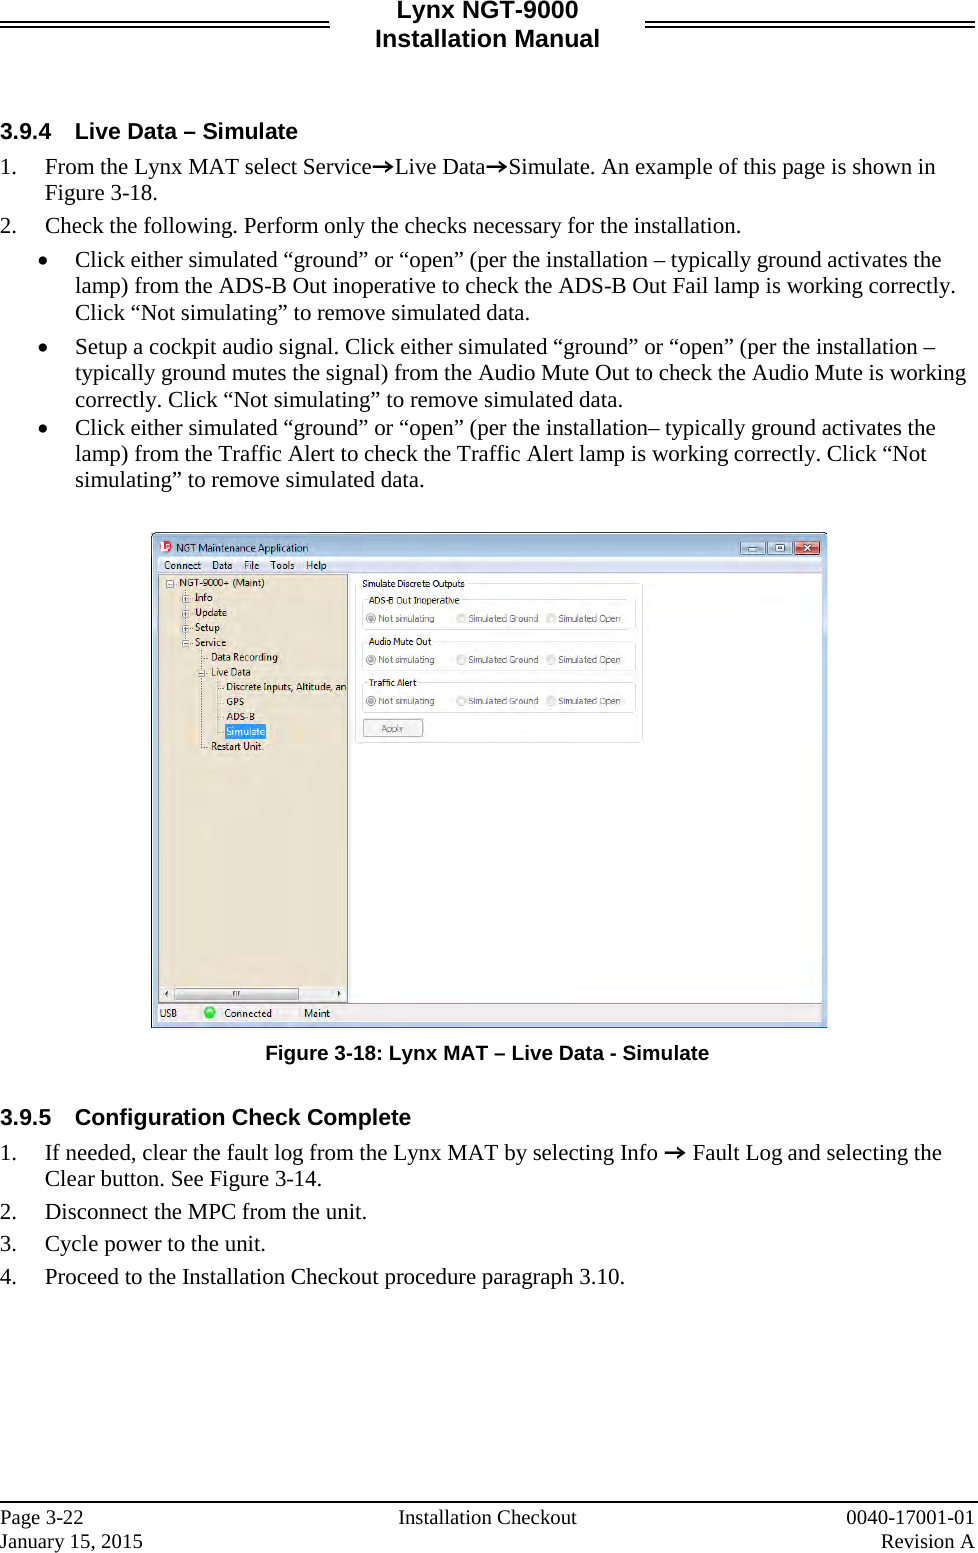 Lynx NGT-9000 Installation Manual   3.9.4 Live Data – Simulate 1. From the Lynx MAT select ServiceZLive DataZSimulate. An example of this page is shown in Figure 3-18.  2. Check the following. Perform only the checks necessary for the installation. • Click either simulated “ground” or “open” (per the installation – typically ground activates the lamp) from the ADS-B Out inoperative to check the ADS-B Out Fail lamp is working correctly. Click “Not simulating” to remove simulated data.  • Setup a cockpit audio signal. Click either simulated “ground” or “open” (per the installation – typically ground mutes the signal) from the Audio Mute Out to check the Audio Mute is working correctly. Click “Not simulating” to remove simulated data. • Click either simulated “ground” or “open” (per the installation– typically ground activates the lamp) from the Traffic Alert to check the Traffic Alert lamp is working correctly. Click “Not simulating” to remove simulated data.   Figure 3-18: Lynx MAT – Live Data - Simulate  3.9.5 Configuration Check Complete 1. If needed, clear the fault log from the Lynx MAT by selecting Info Z Fault Log and selecting the Clear button. See Figure 3-14. 2. Disconnect the MPC from the unit.  3. Cycle power to the unit.  4. Proceed to the Installation Checkout procedure paragraph 3.10.    Page 3-22   Installation Checkout 0040-17001-01 January 15, 2015    Revision A  